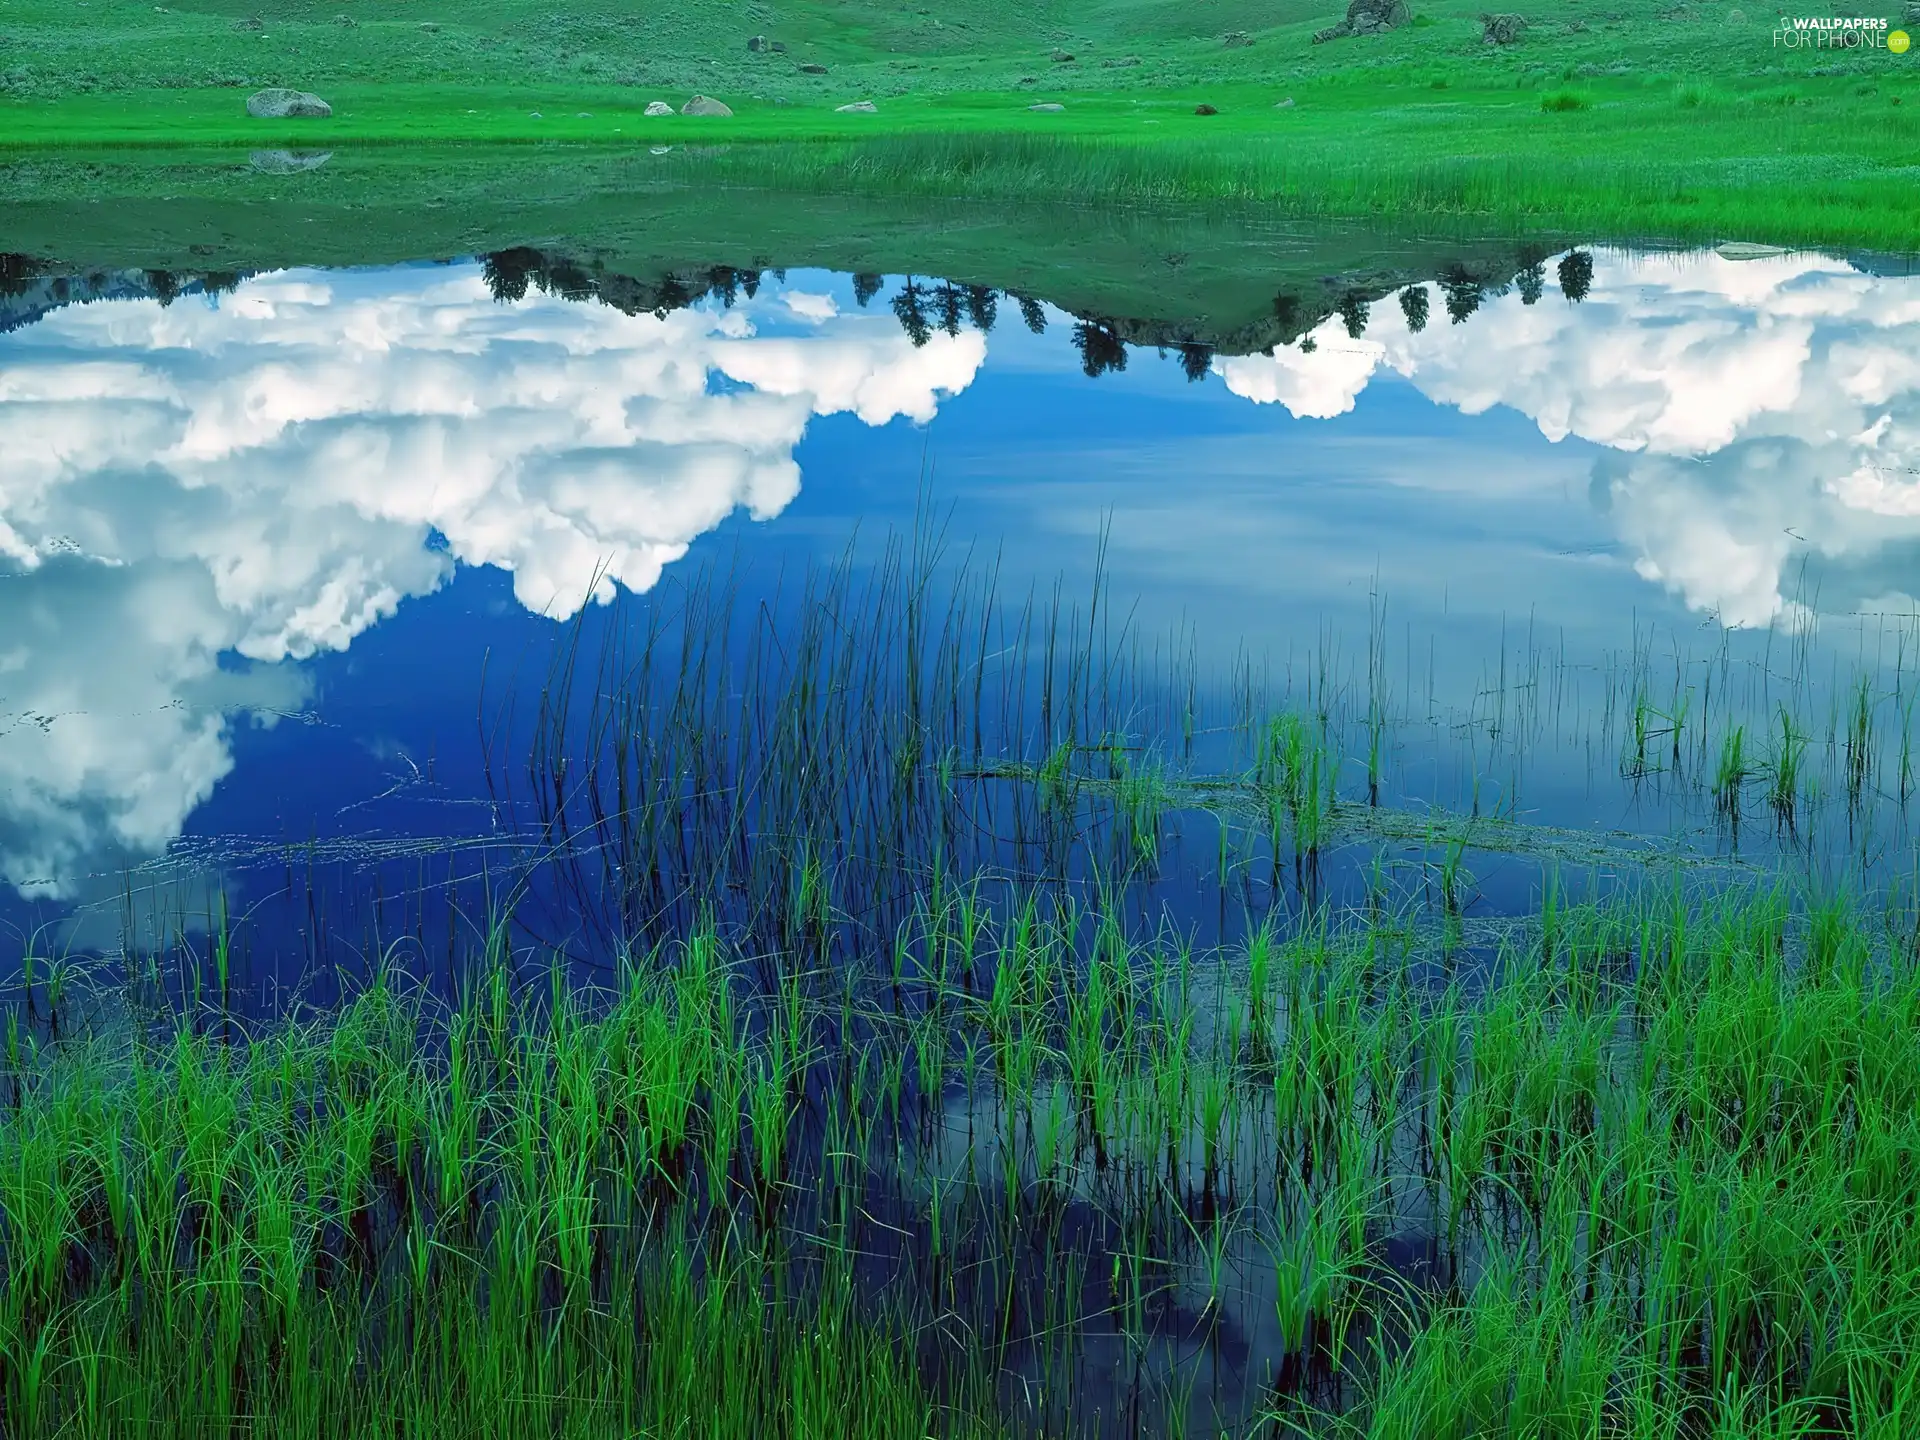 Pond - car, reflection, clouds